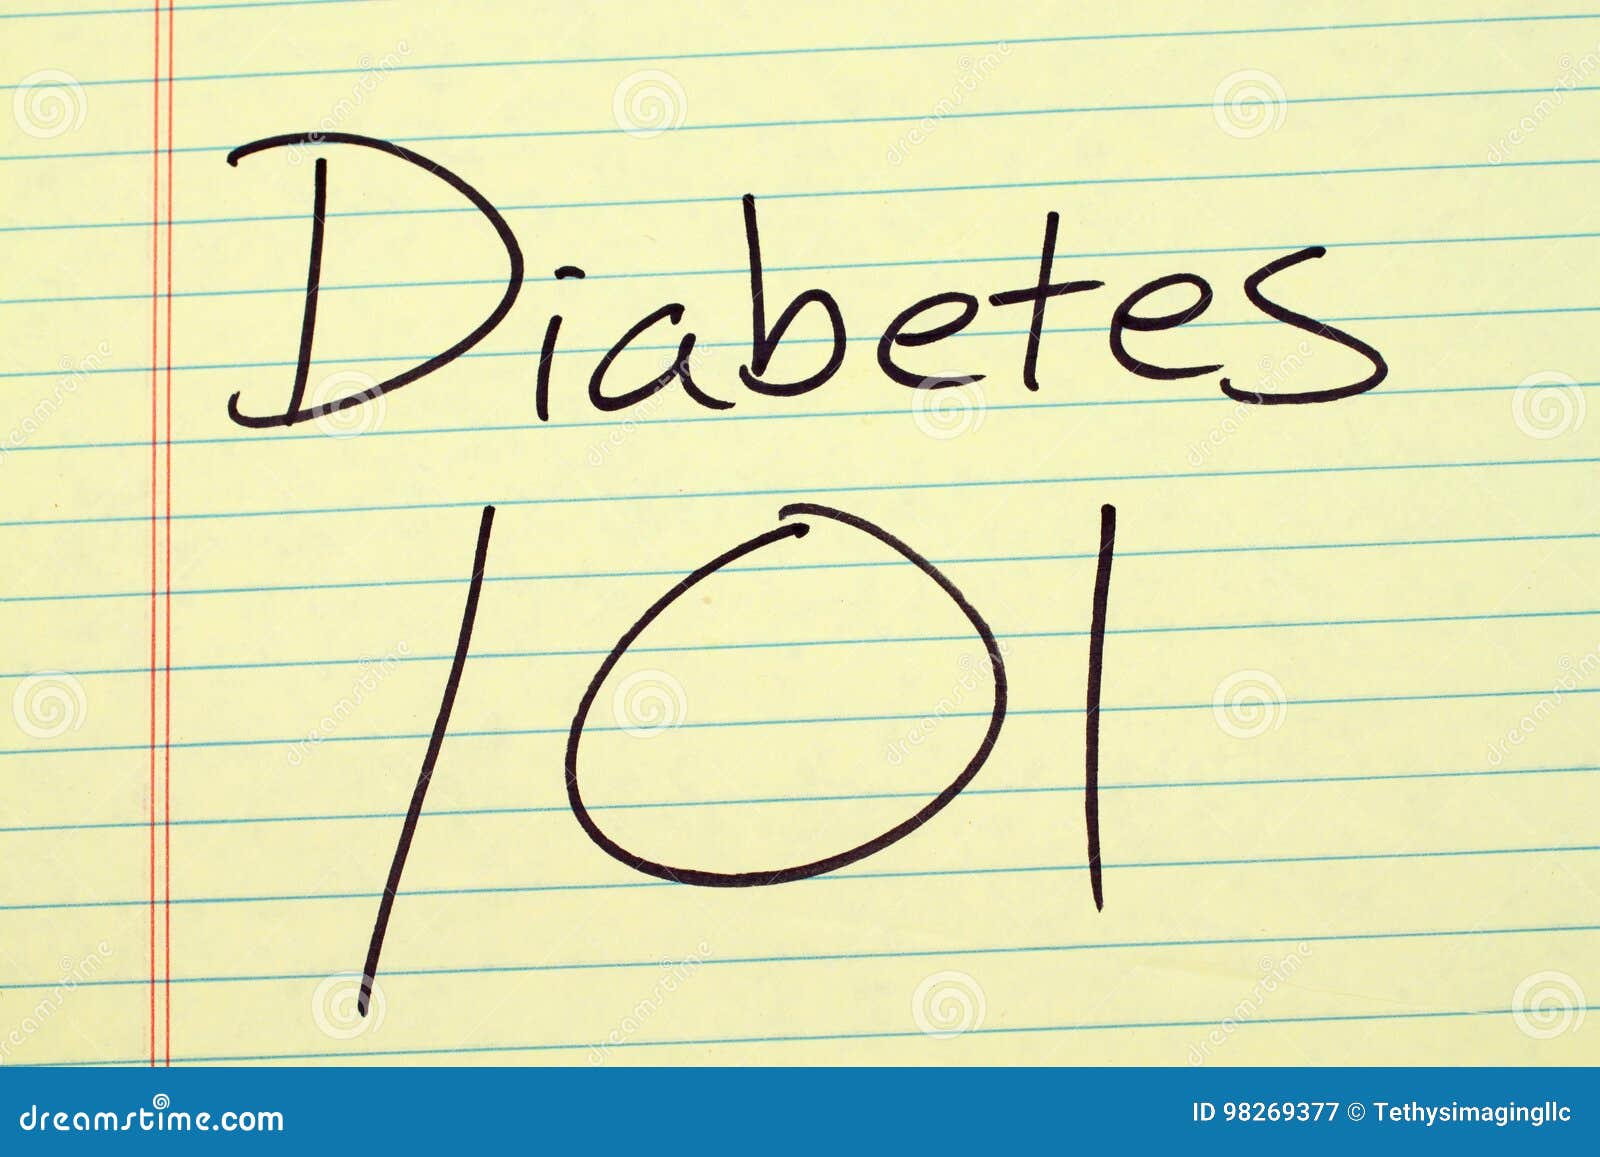 diabetes 101 on a yellow legal pad